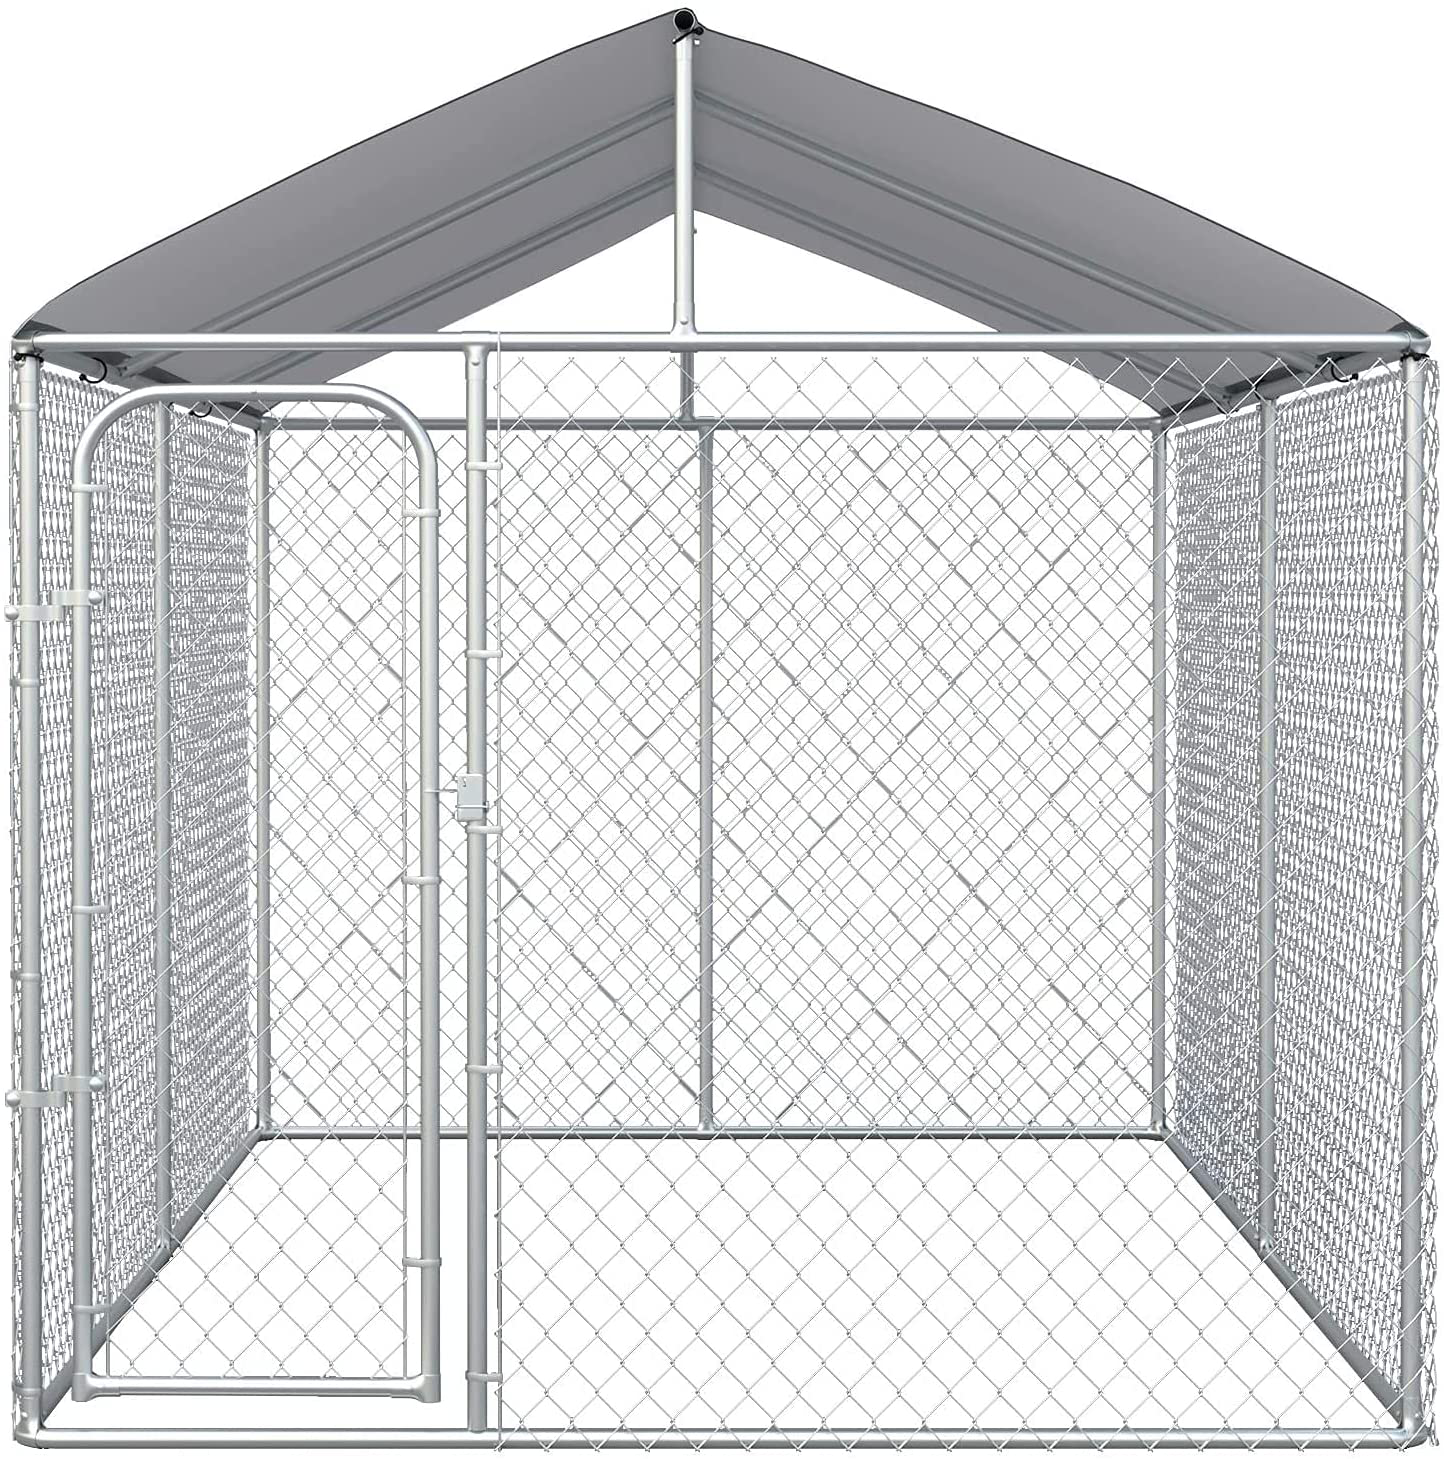 ARARG Dog Kennel Outdoor Dog Crates for Large Dogs Metal Dog Run House Dog Cage with Water-Resistant Cover for Backyard